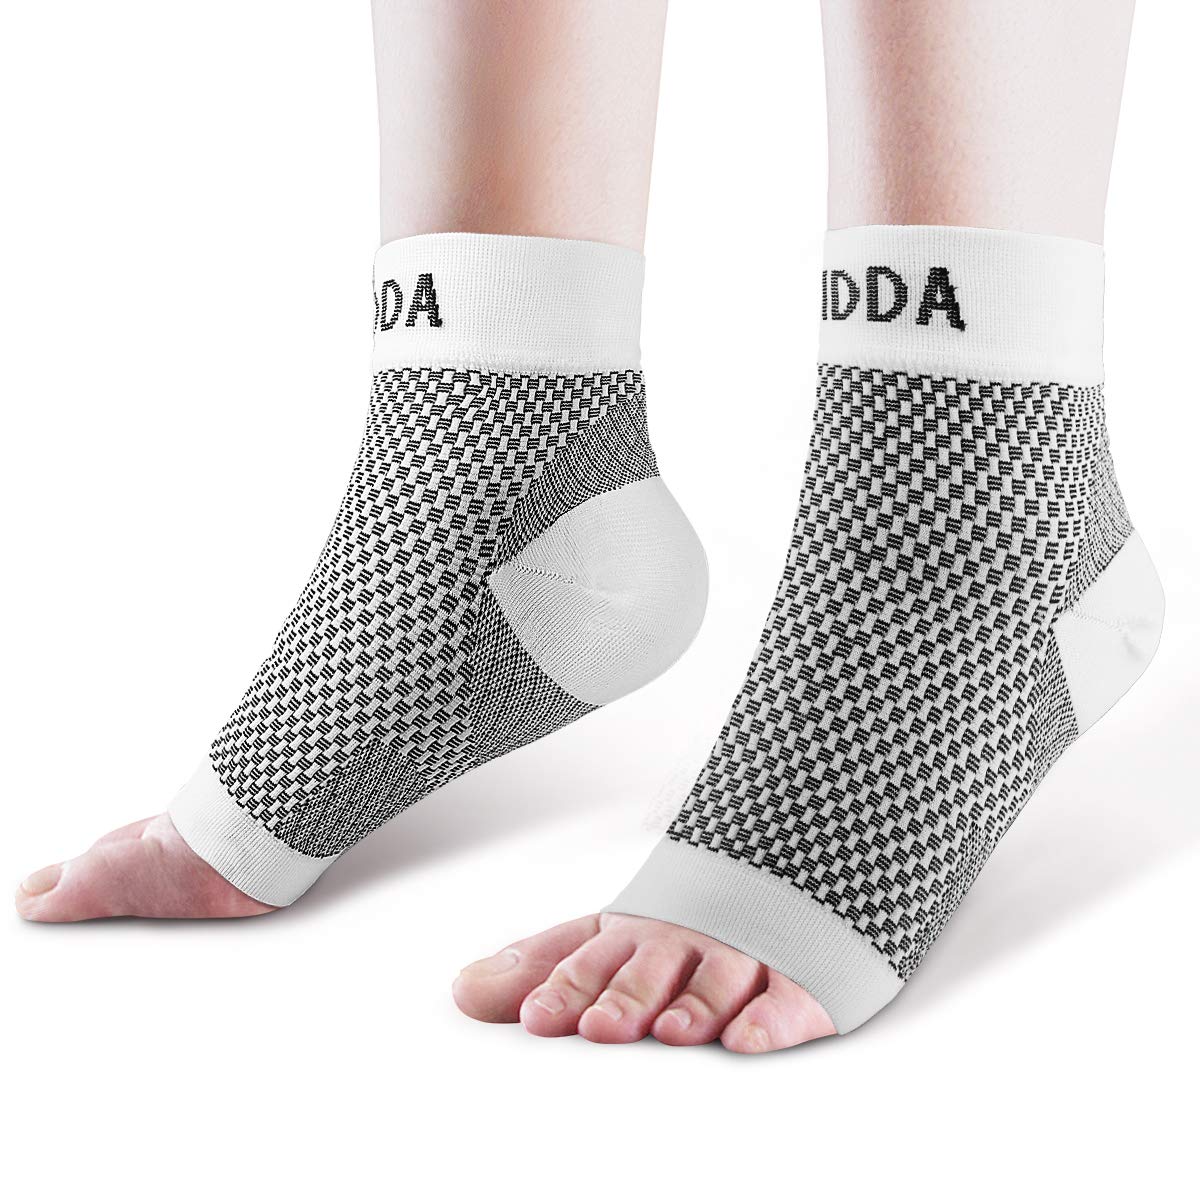 AVIDDA Plantar Fasciitis Socks with Heels Arch Supports, Compression Sleeves Ideal for Arthritis Pain Relief and Suitable for Sports, Ankle Supports for Men and Women White-1-S